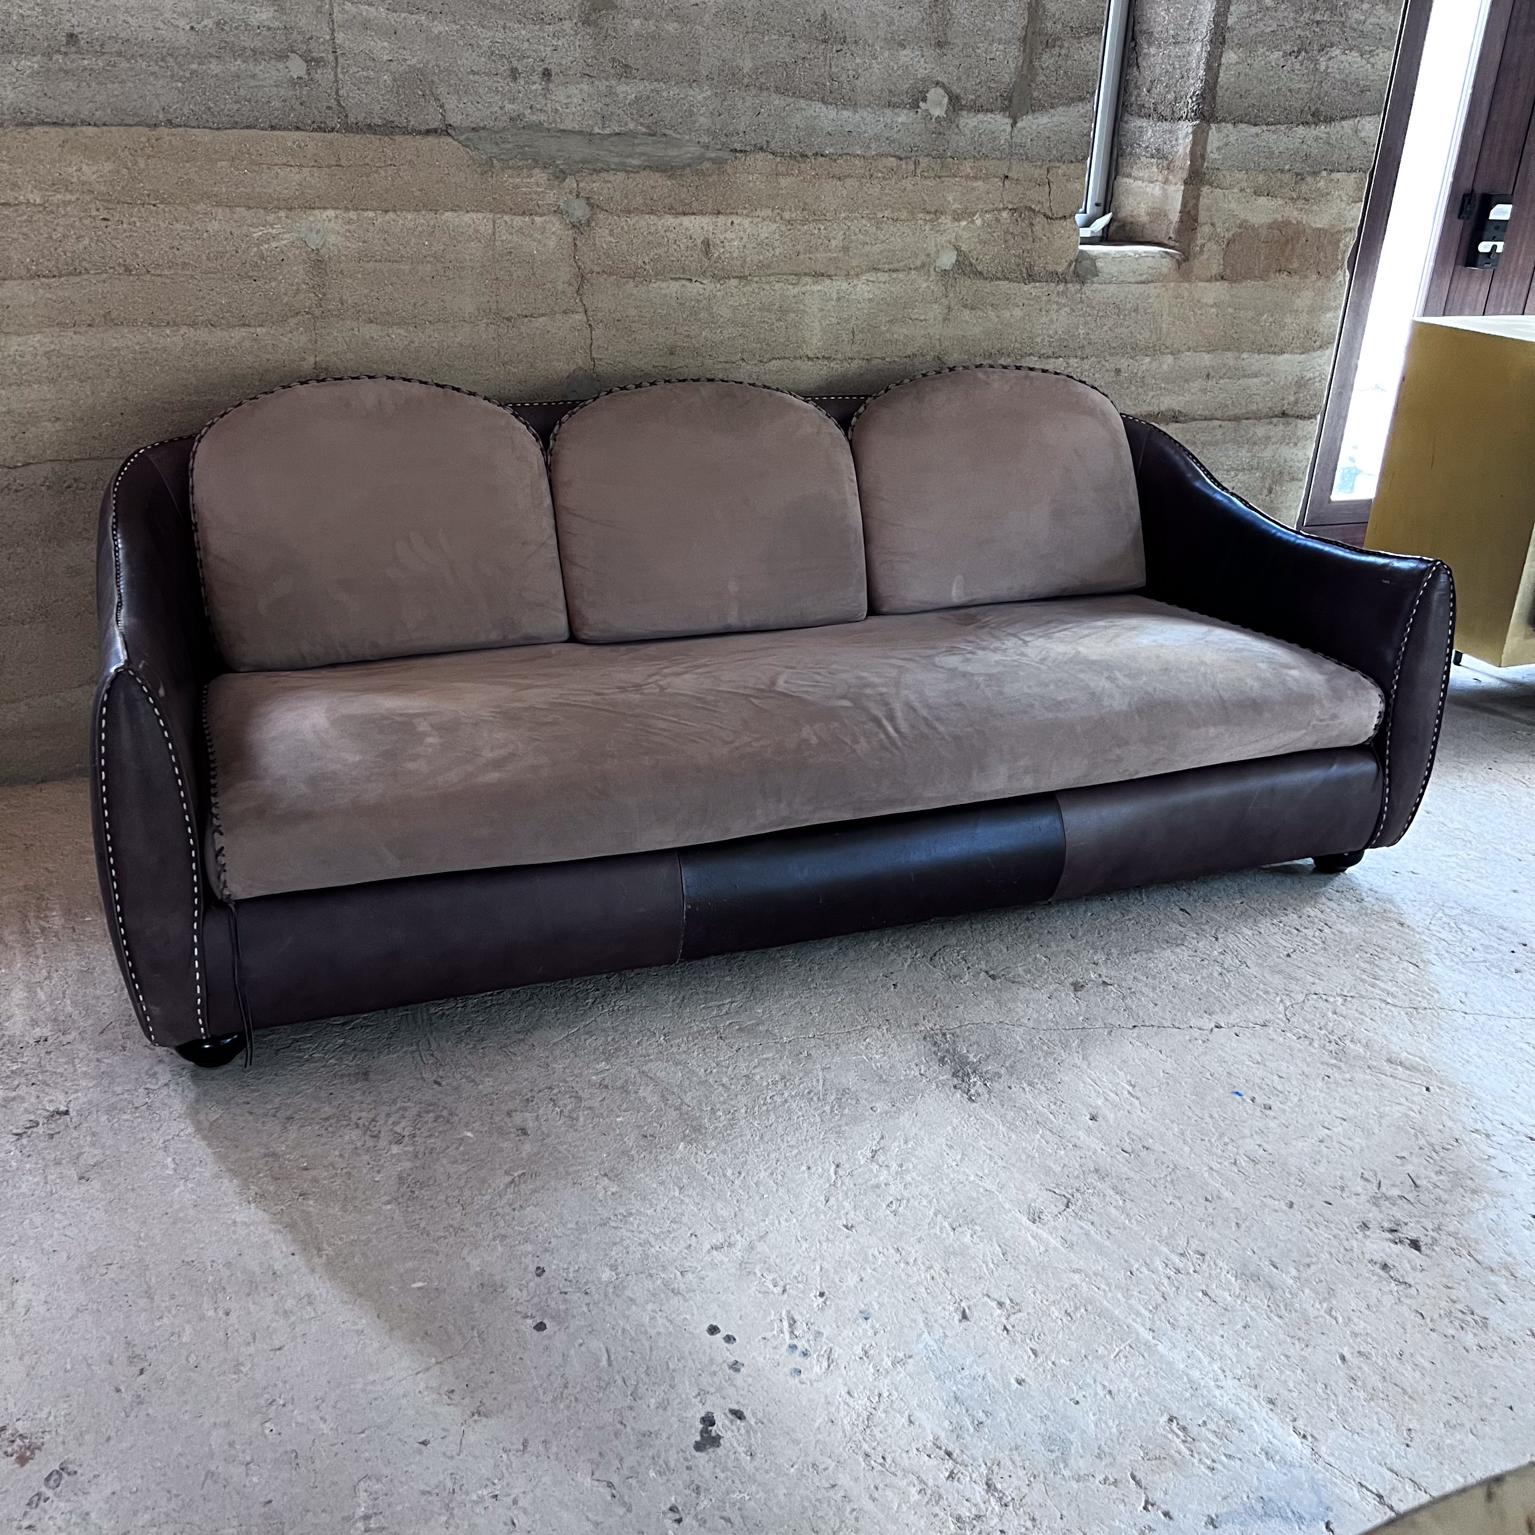 1960s Modern Whipstitched Brown Leather Three-Seater Sofa
unmarked in the style of Swiss De Sede
85 W 29 H x 36 D, Seat 17 H, Arm rest 24, deep seat.
Original preowned vintage condition
Refer to all images
Delivery to LA SF OC PS